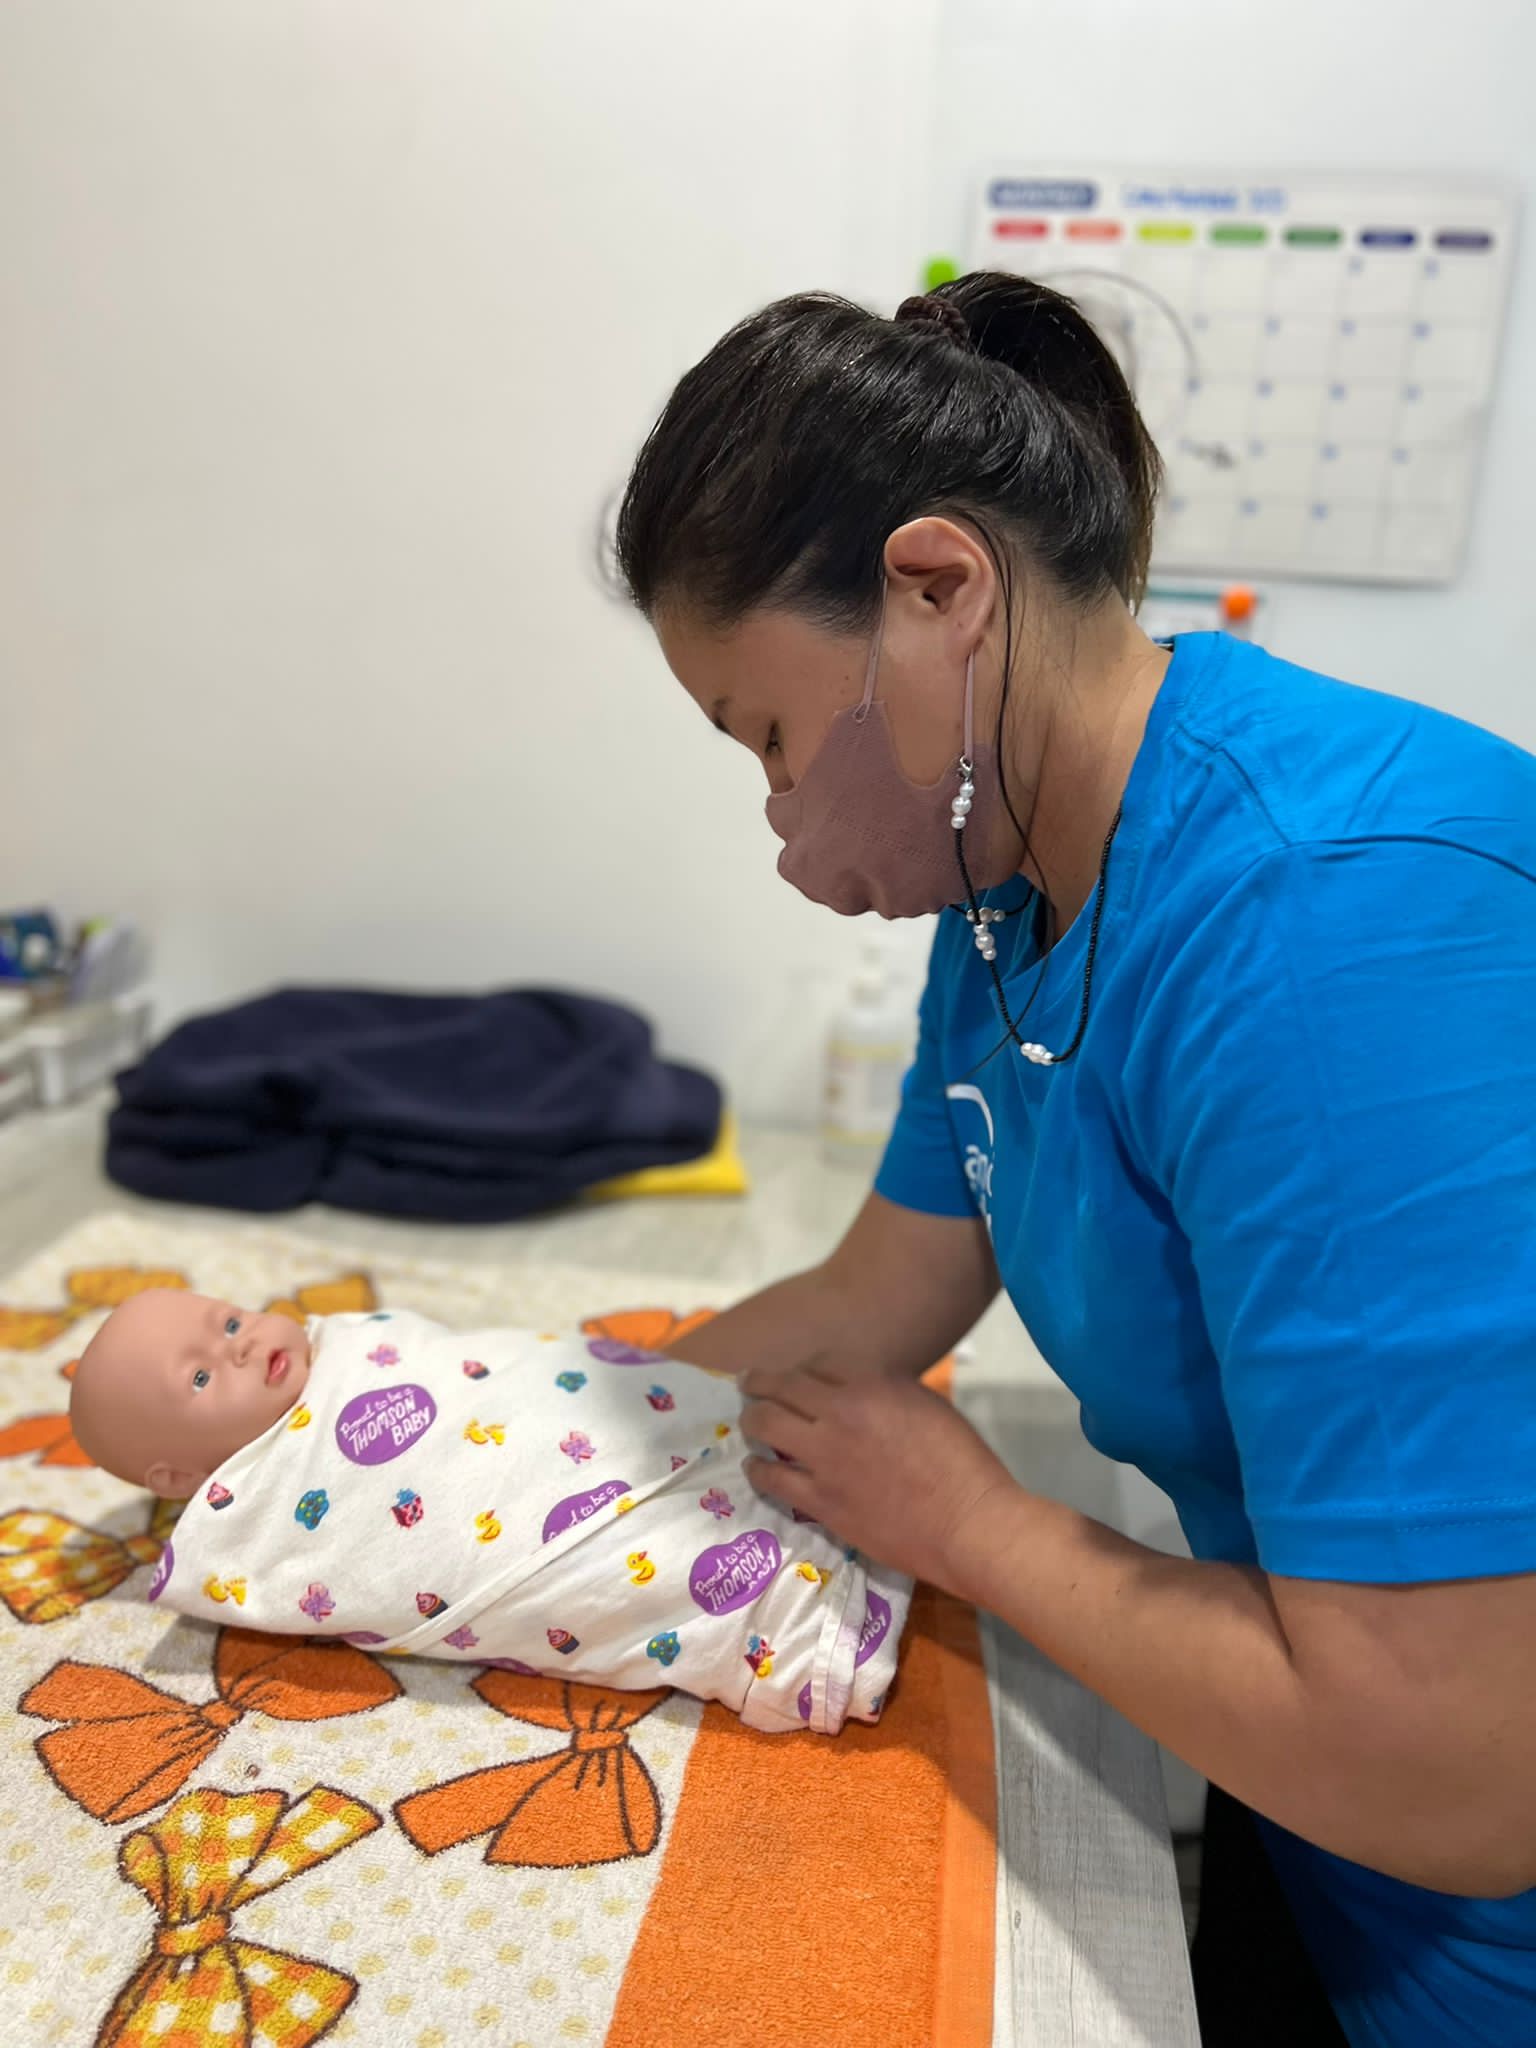 Hands On Infant Care Training (Domestic Helpers)